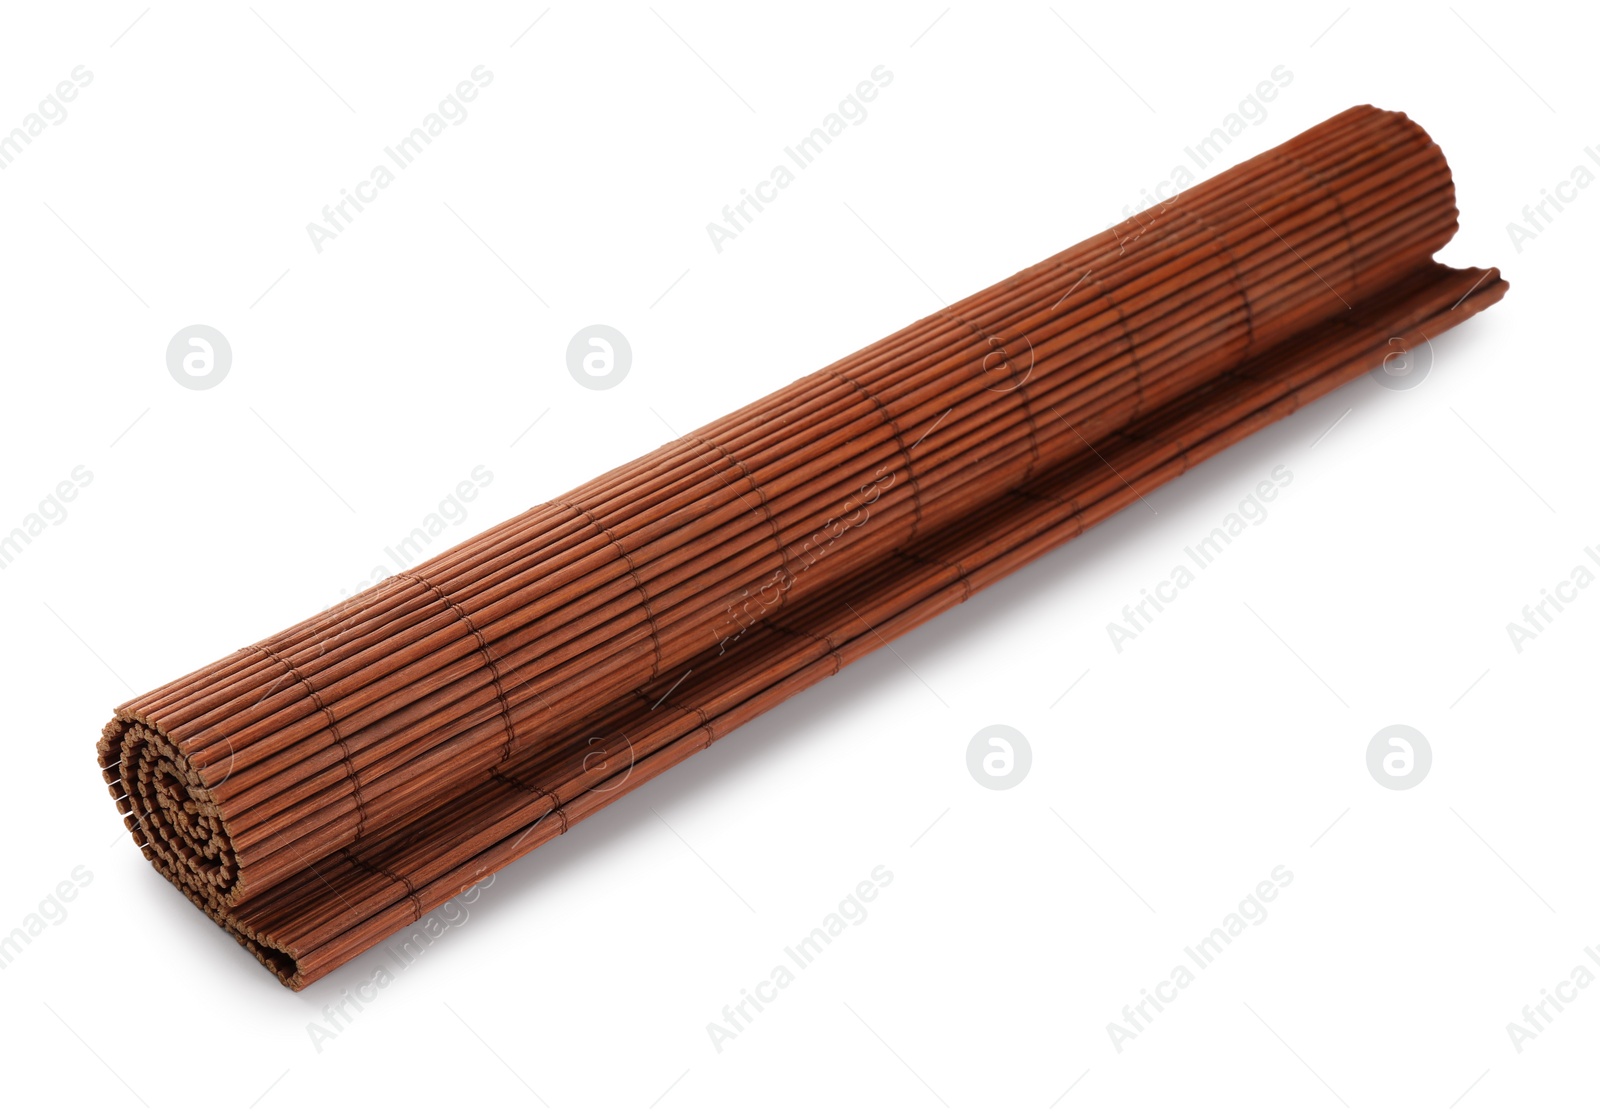 Photo of Rolled sushi mat made of bamboo on white background